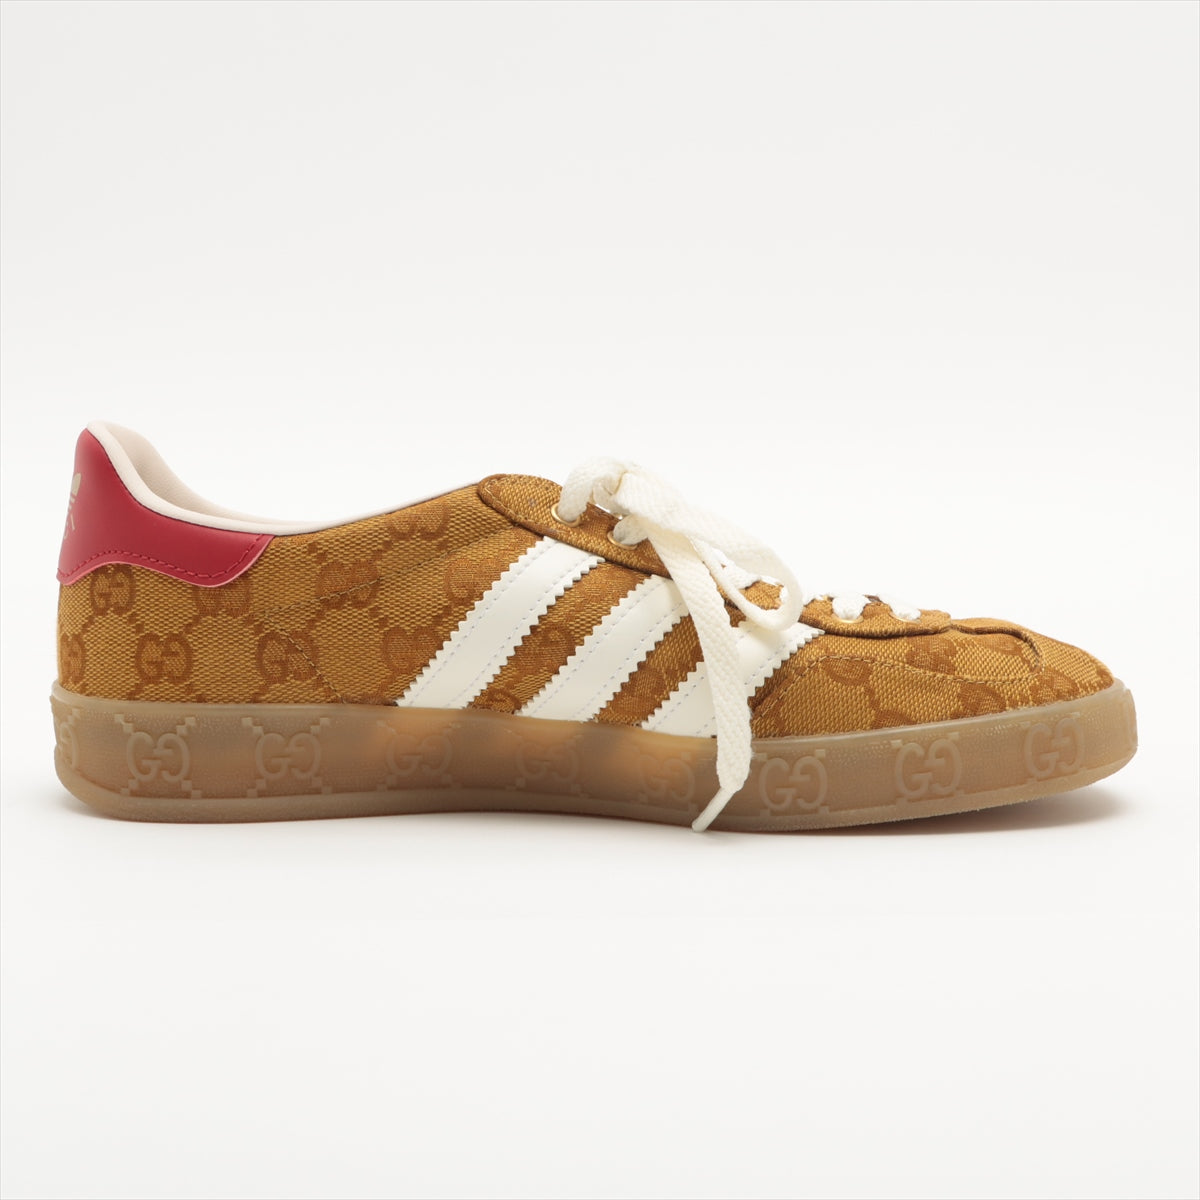 Gucci x adidas Gazelle Canvas & leather Sneakers 23.5㎝ Ladies' Brown HQ7086